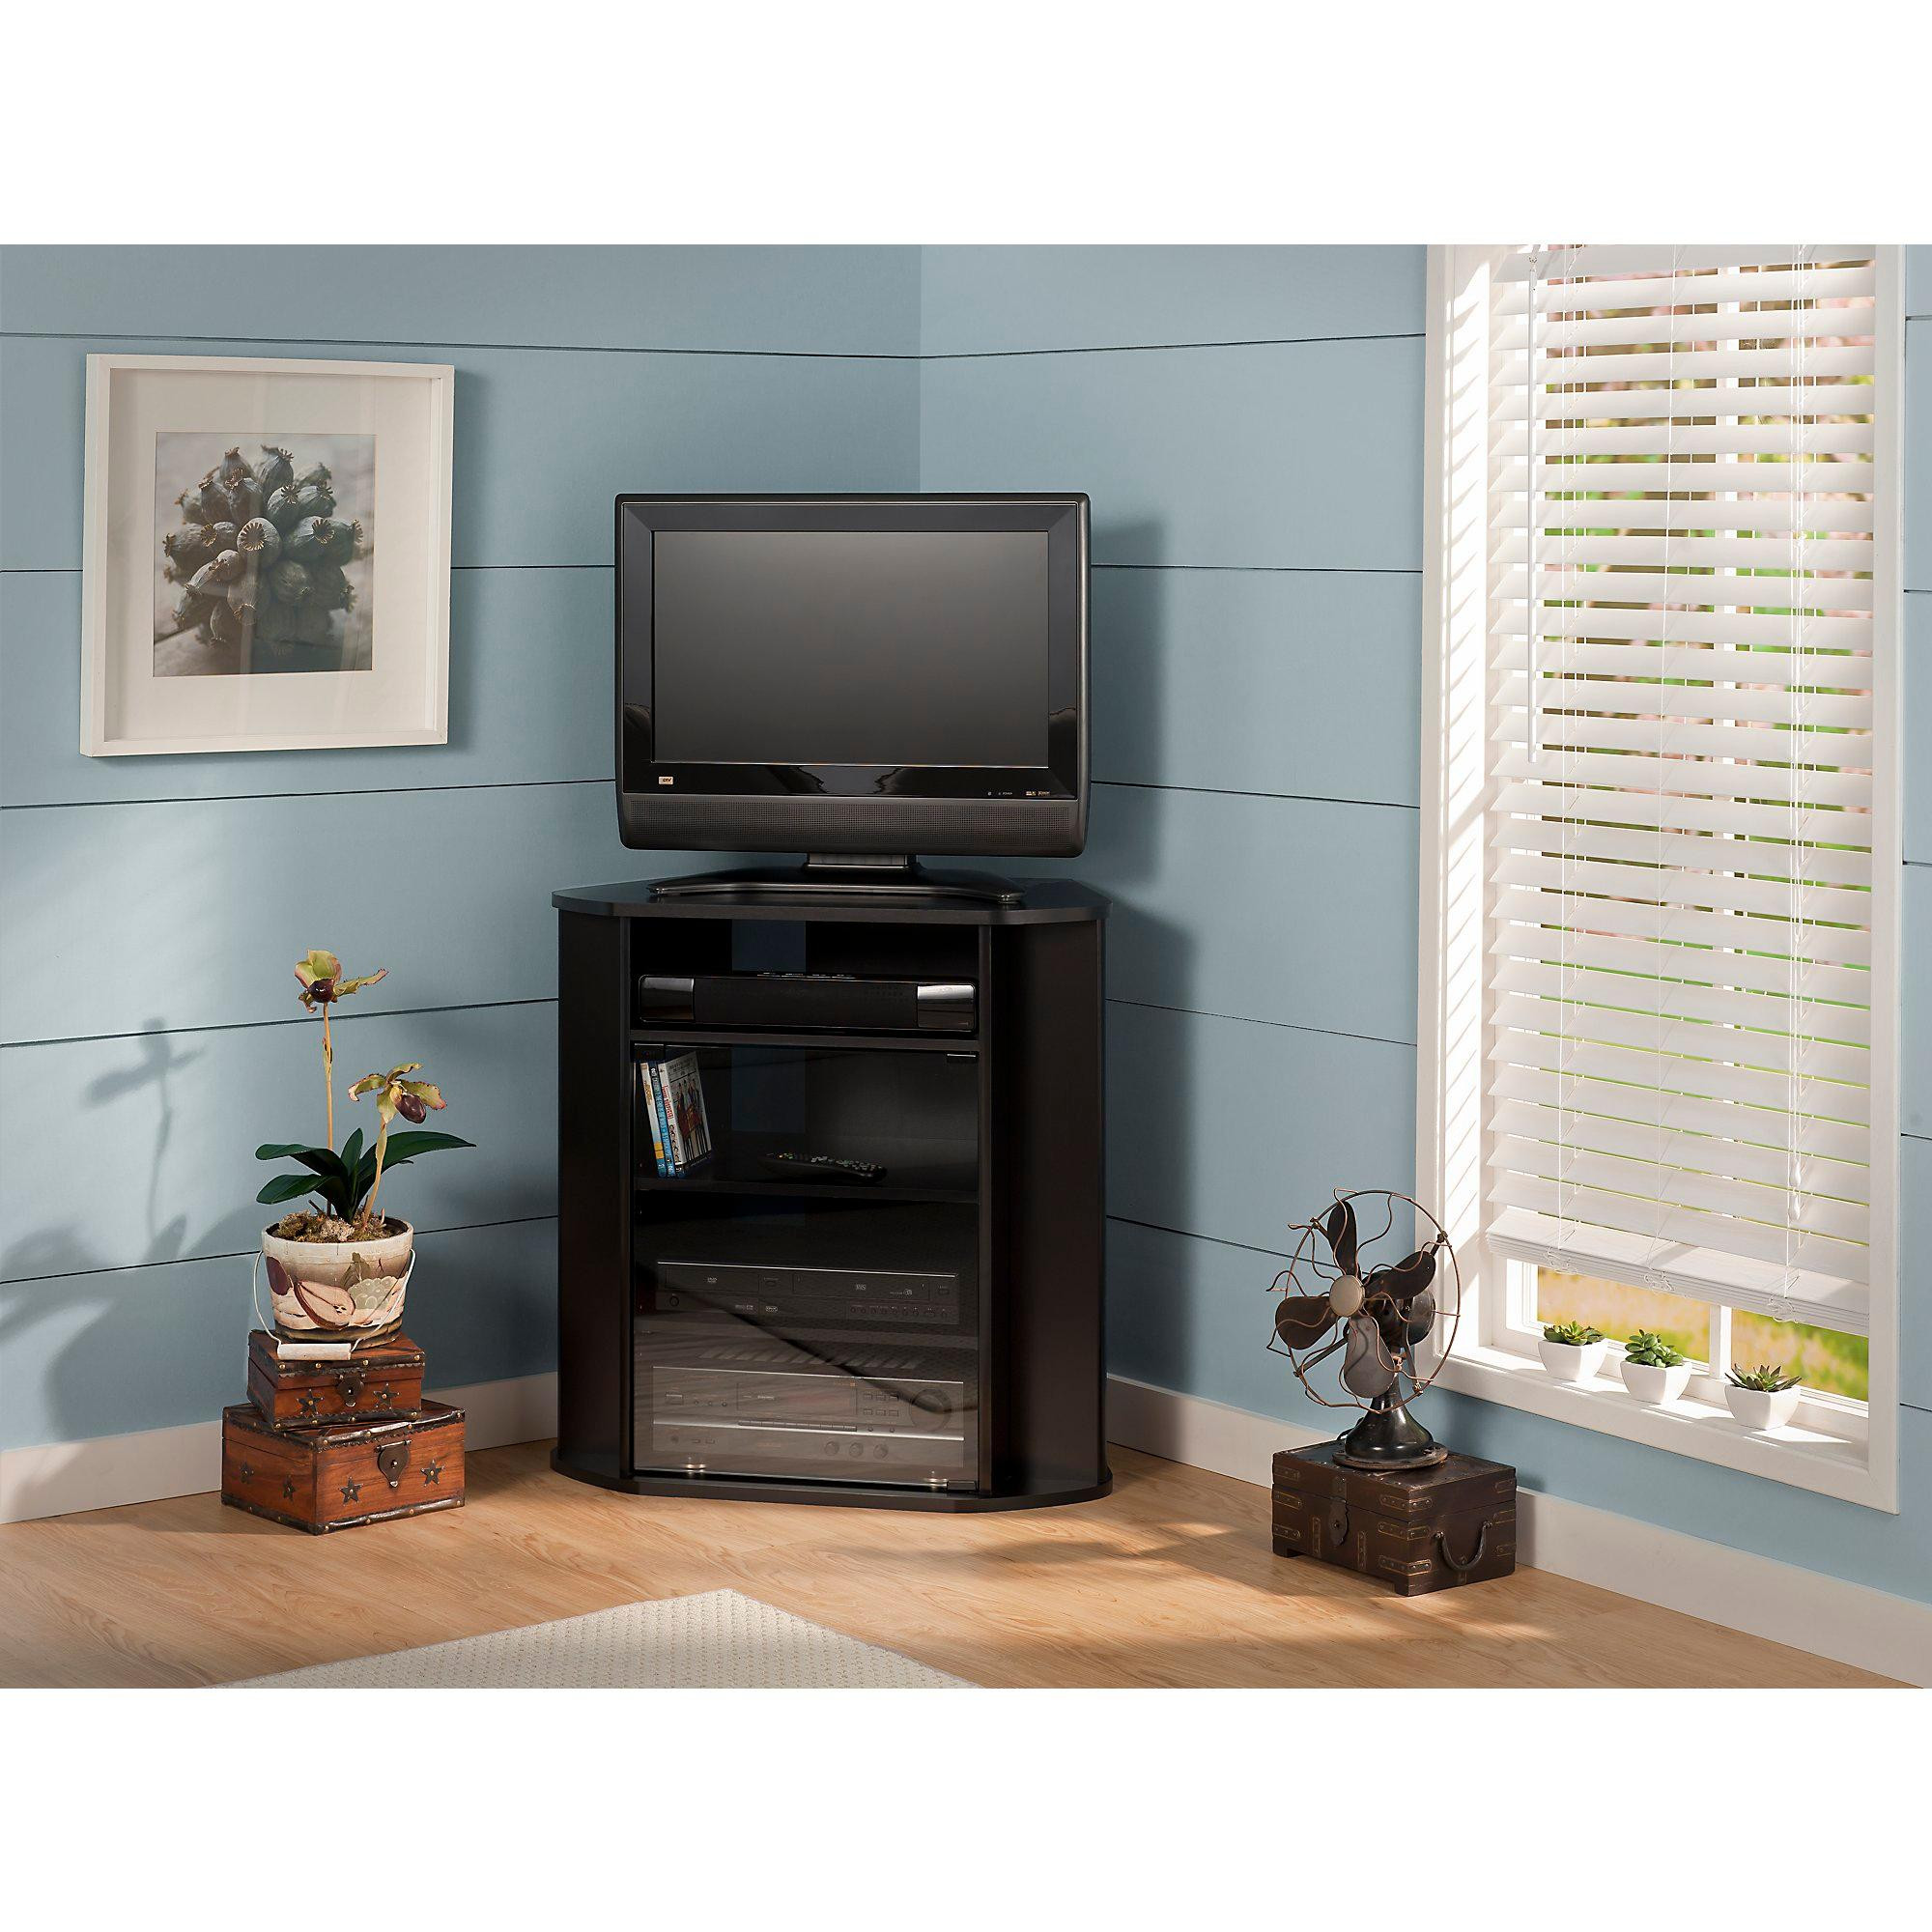 Small Tv For Kitchen Amazon
 Amazon Visions Tall Corner TV Stand in Black and